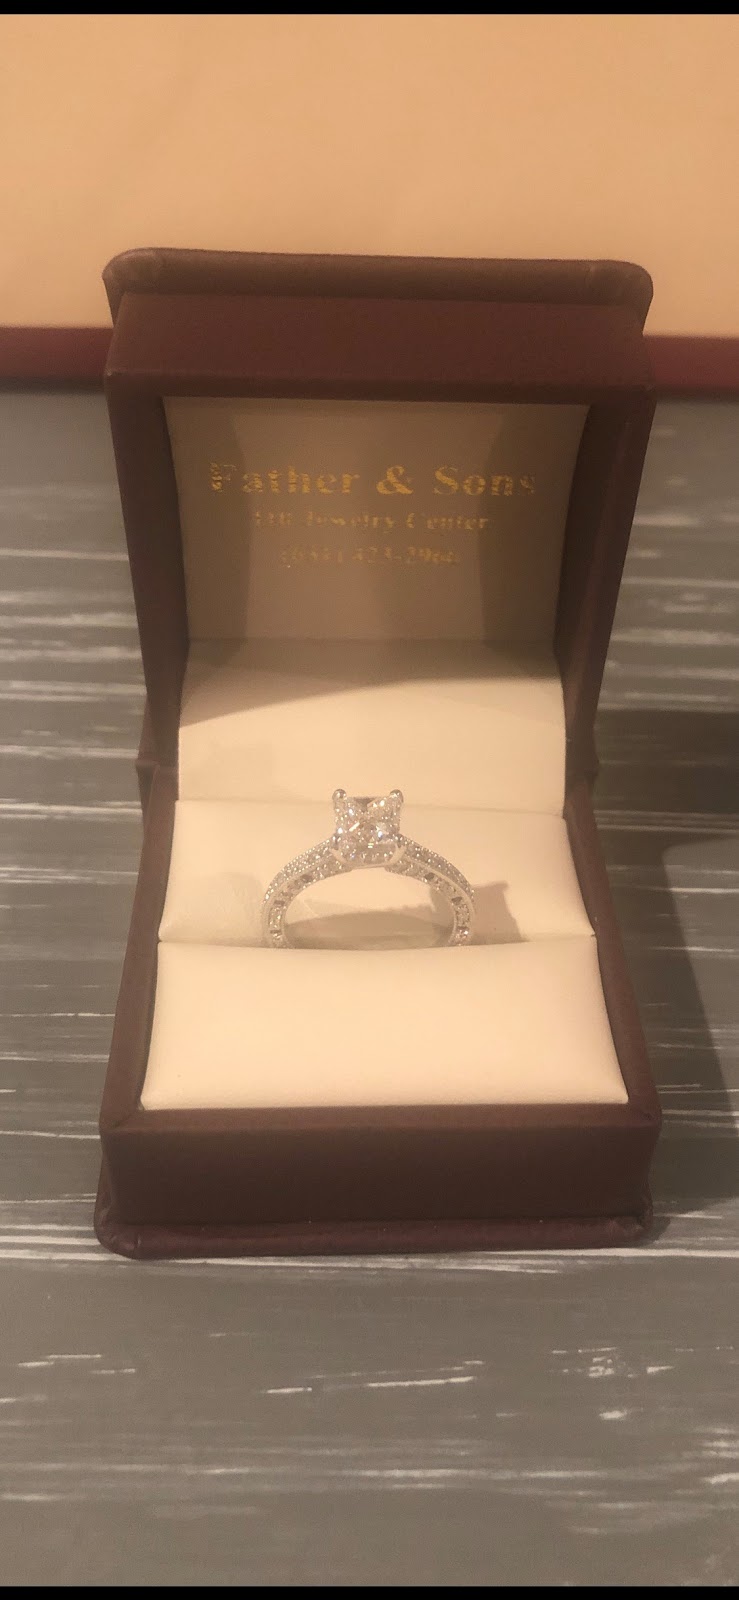 Father & Sons 110 Jewelry Center | 829 Walt Whitman Rd, Melville, NY 11747 | Phone: (631) 423-2966